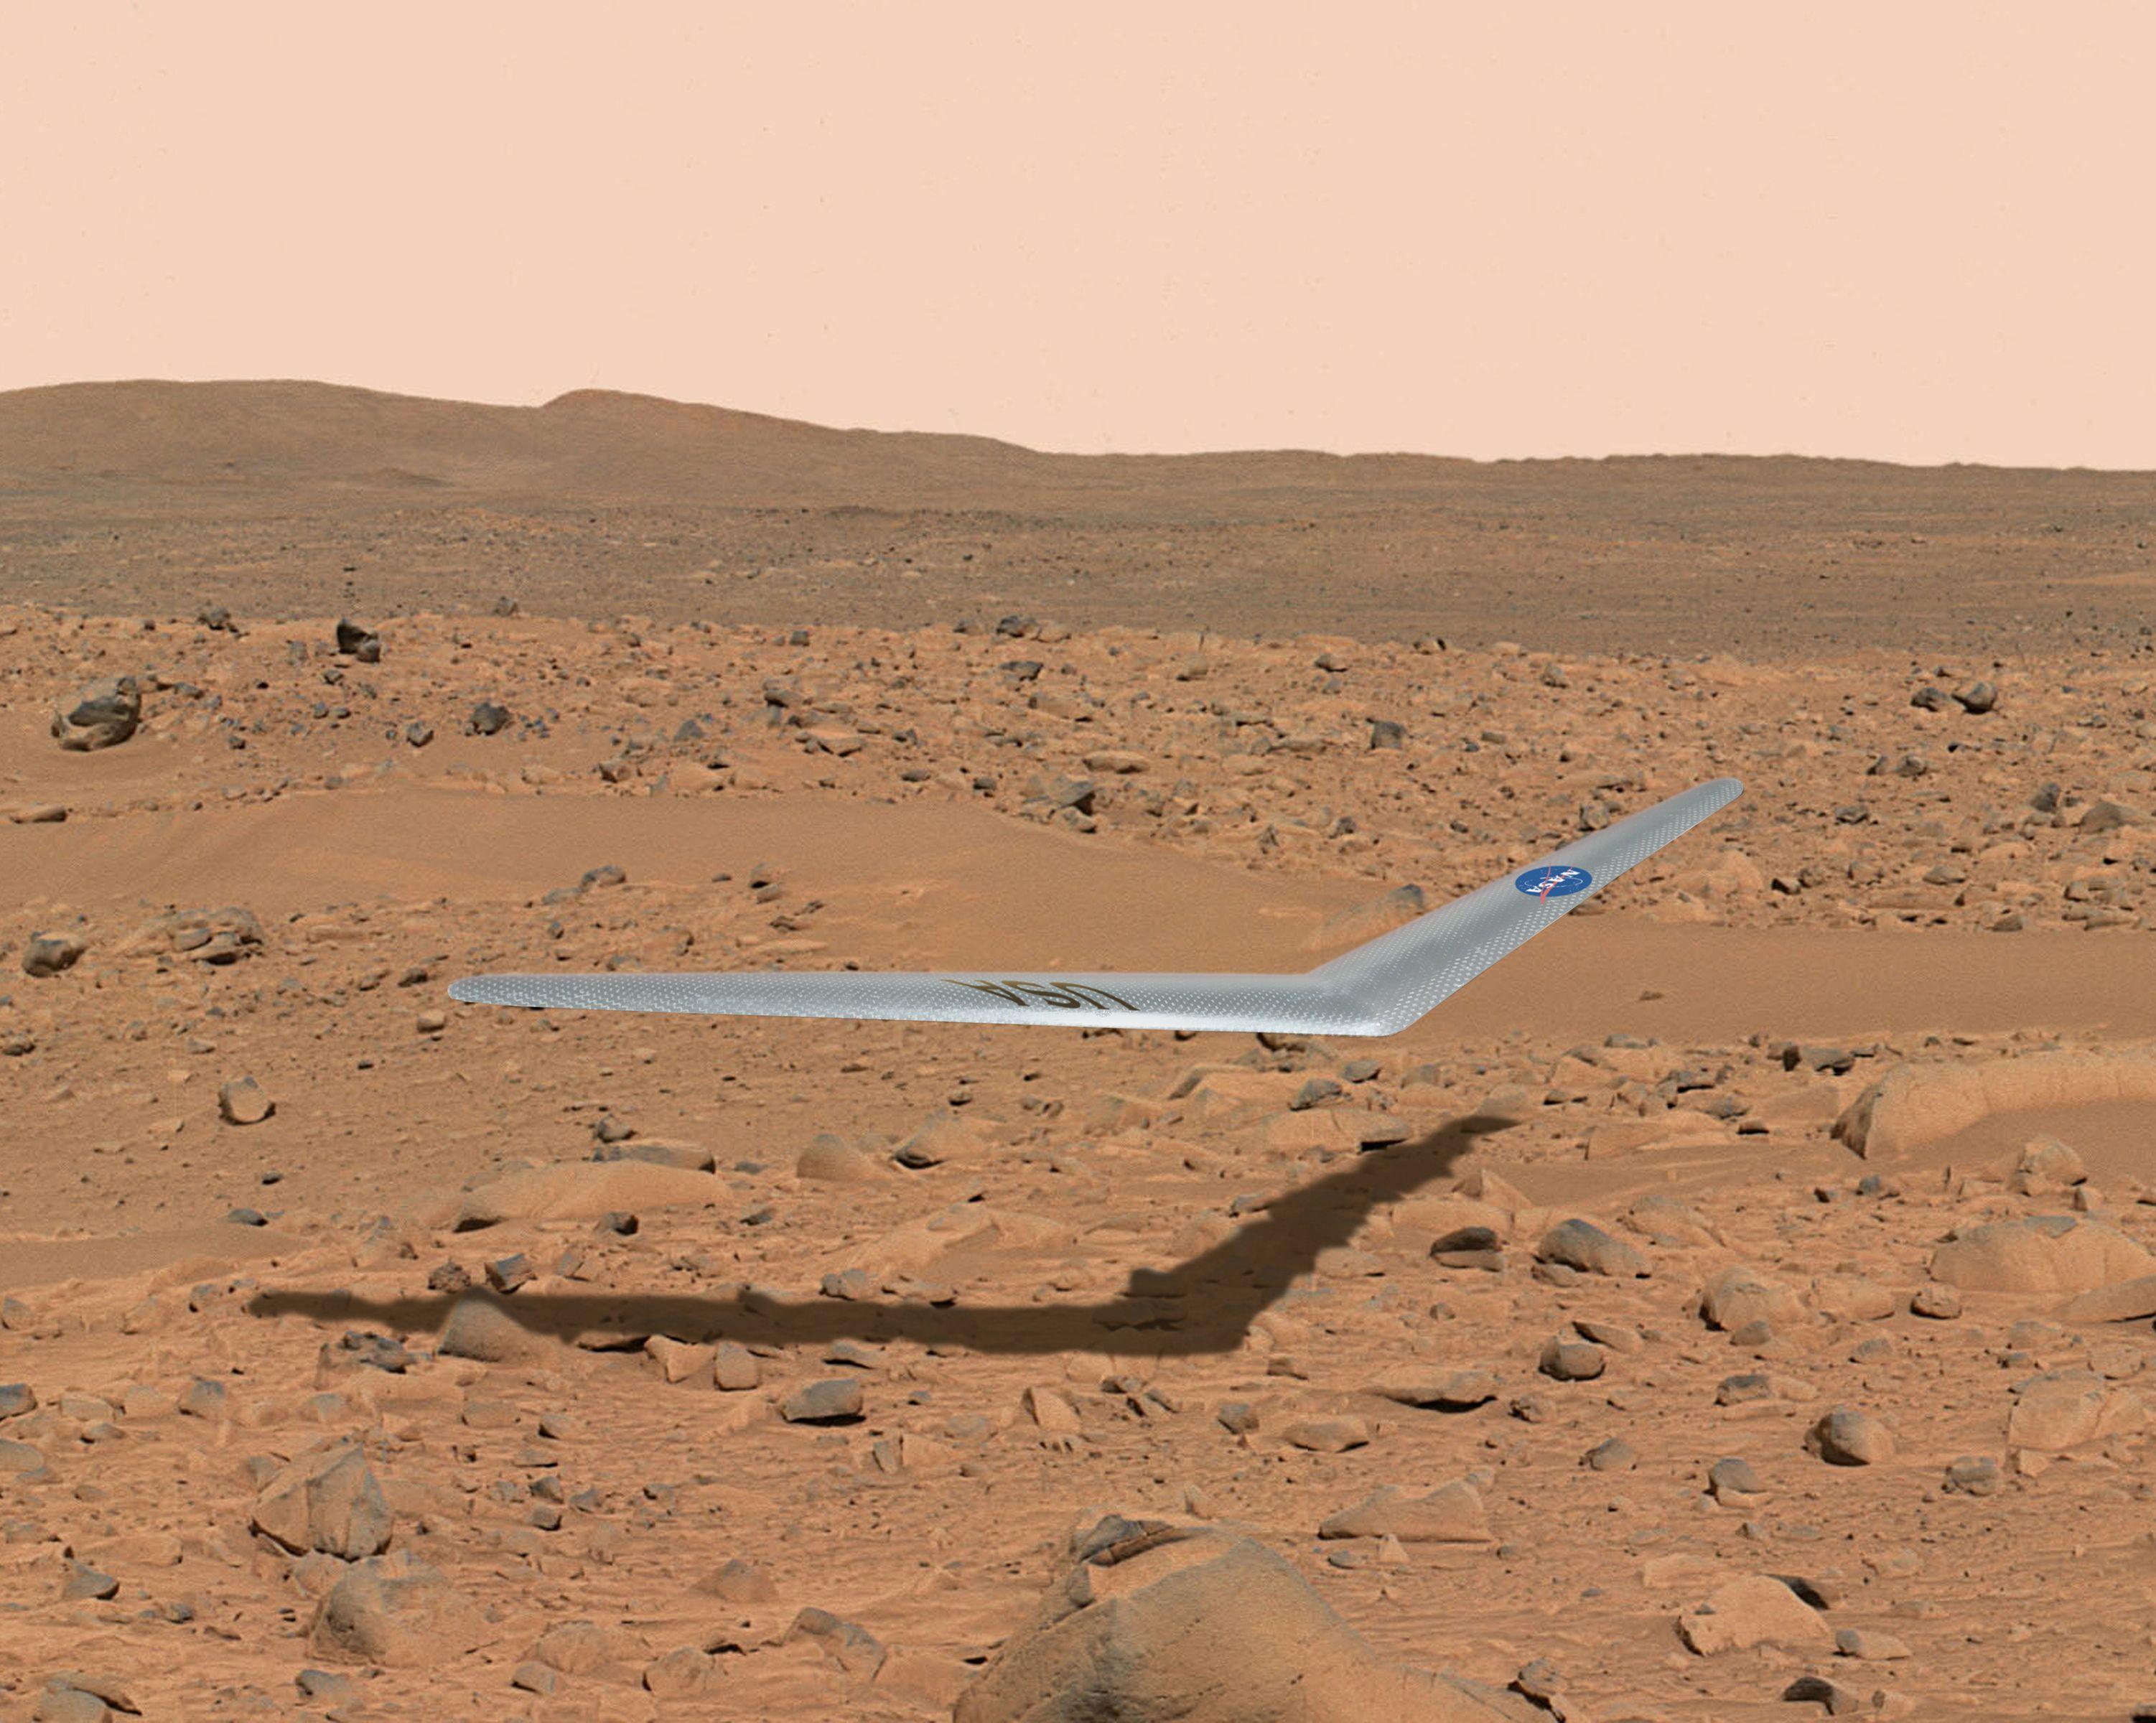 Looks Like Two Boomerangs Logo - This Boomerang Like Aircraft Could Be The First To Fly On Mars